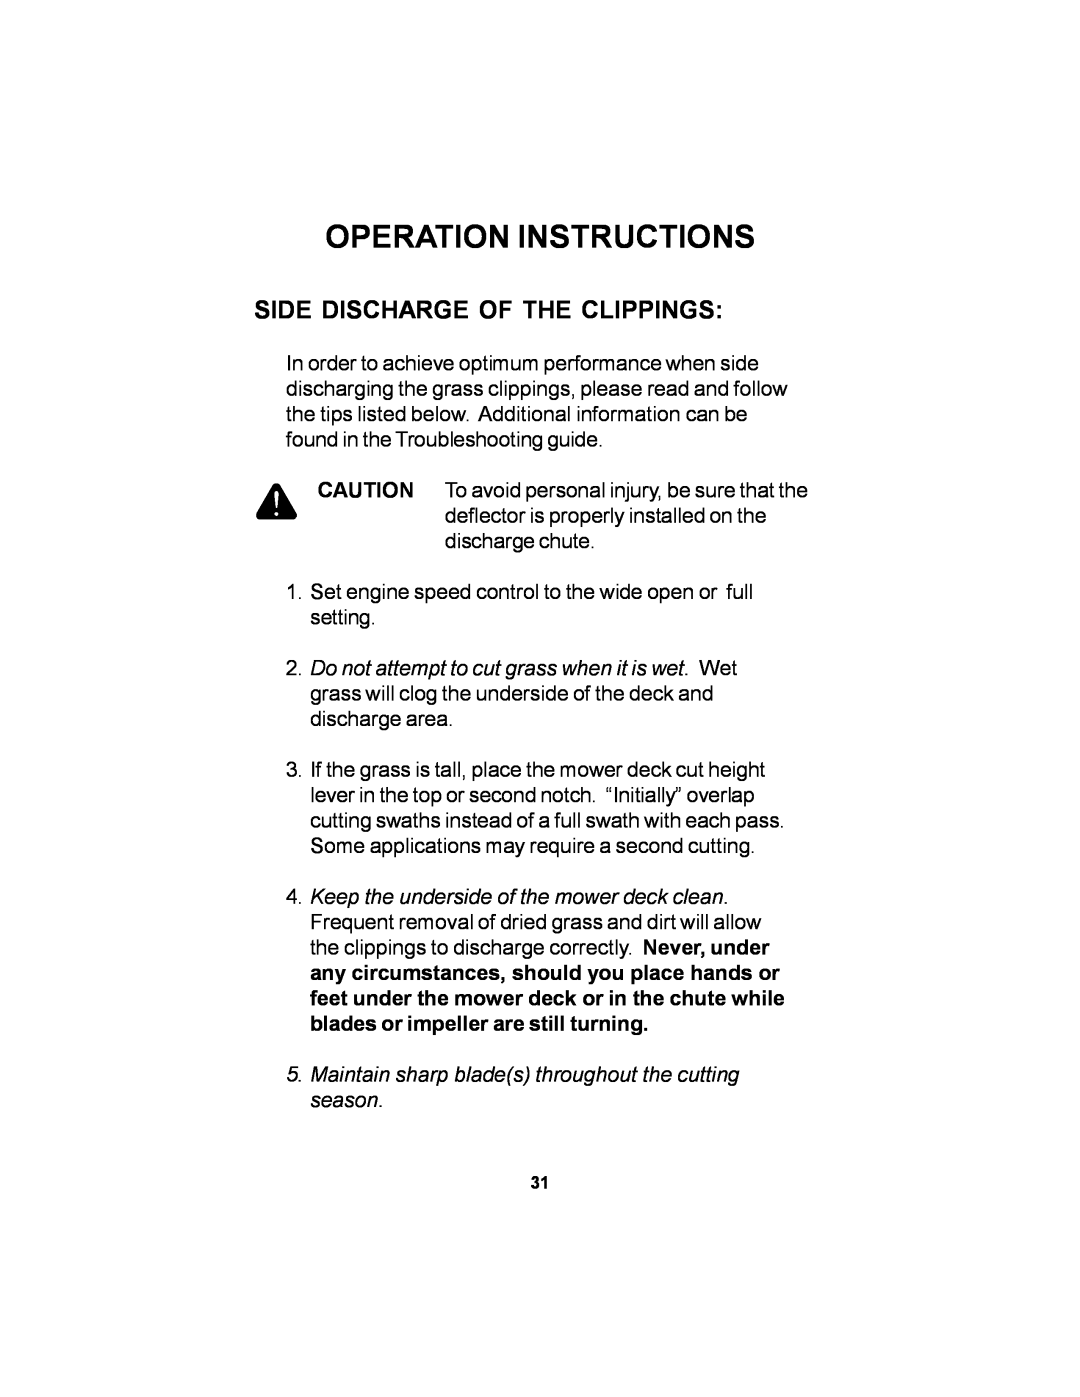 Dixon Black Bear manual Side Discharge Of The Clippings, Operation Instructions 